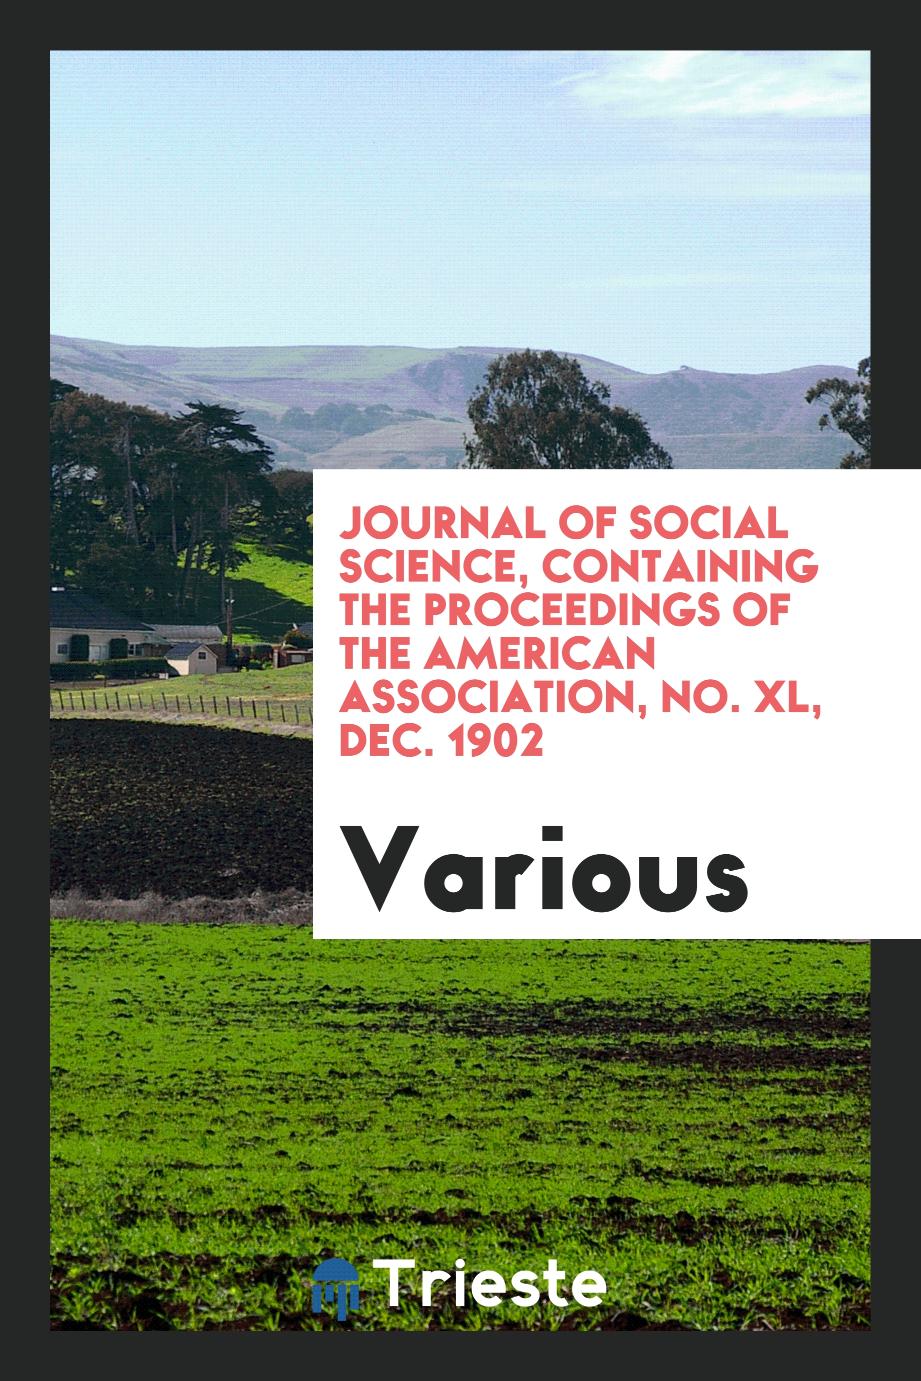 Journal of social science, containing the proceedings of the American Association, No. XL, Dec. 1902